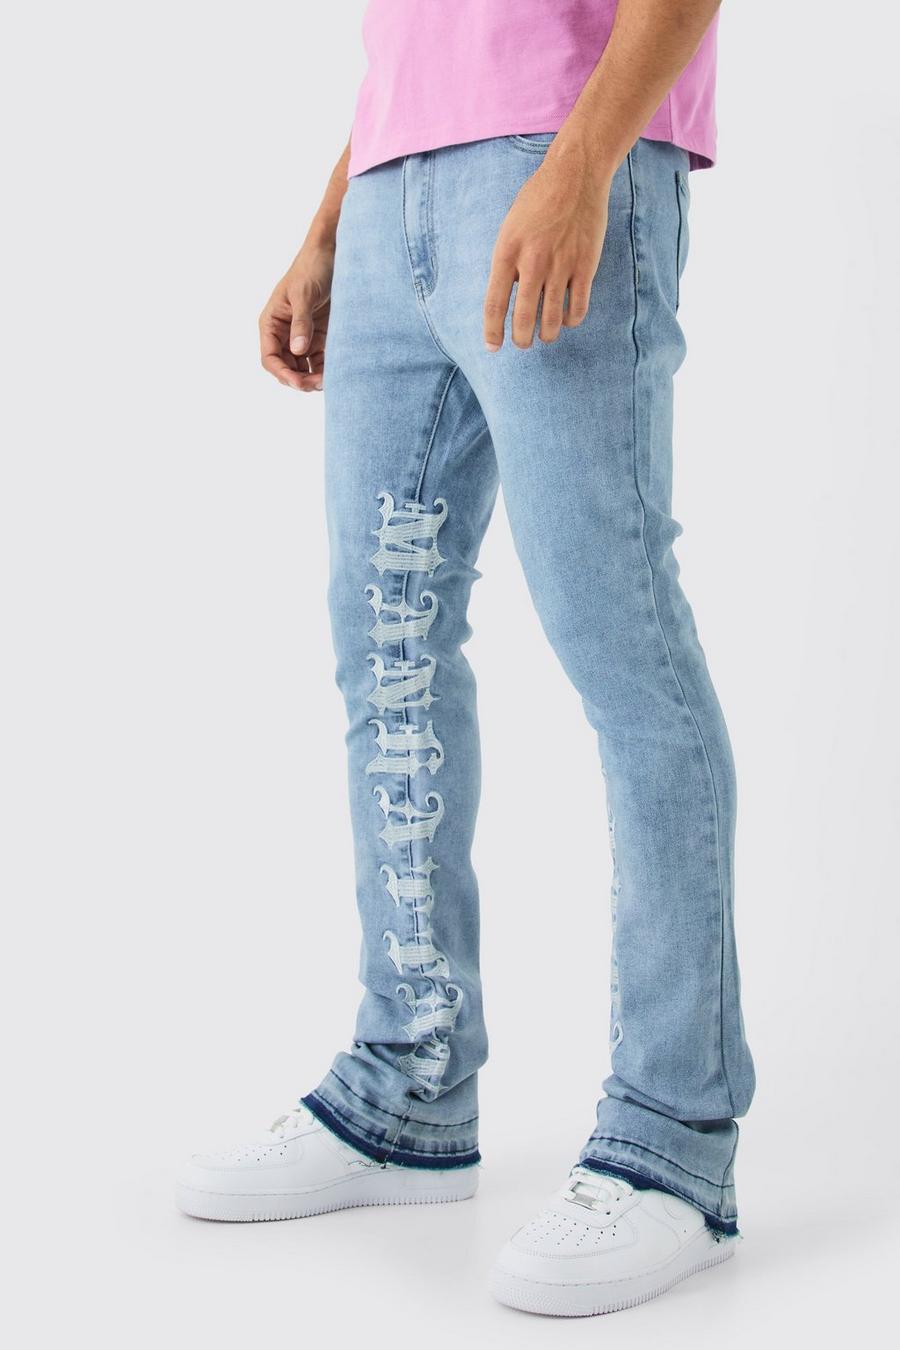 Men's Boot Cut Jean with Gusset - All American Clothing Co